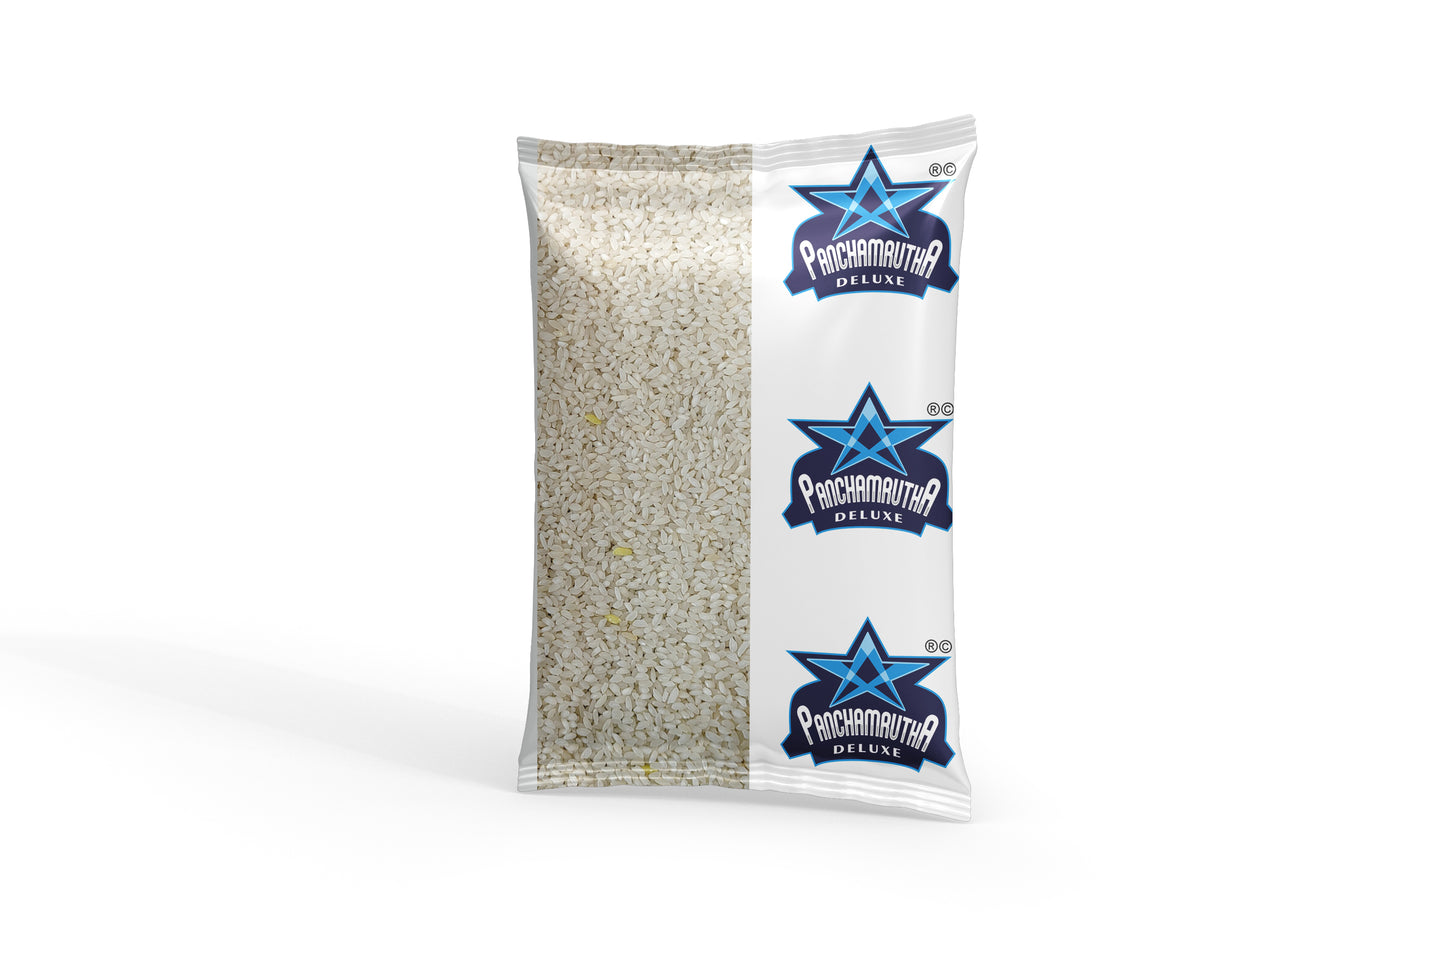 Panchamrutha Deluxe Ambemohar Rice +F (Fortified with 9 VITAMINS & MINERALS)